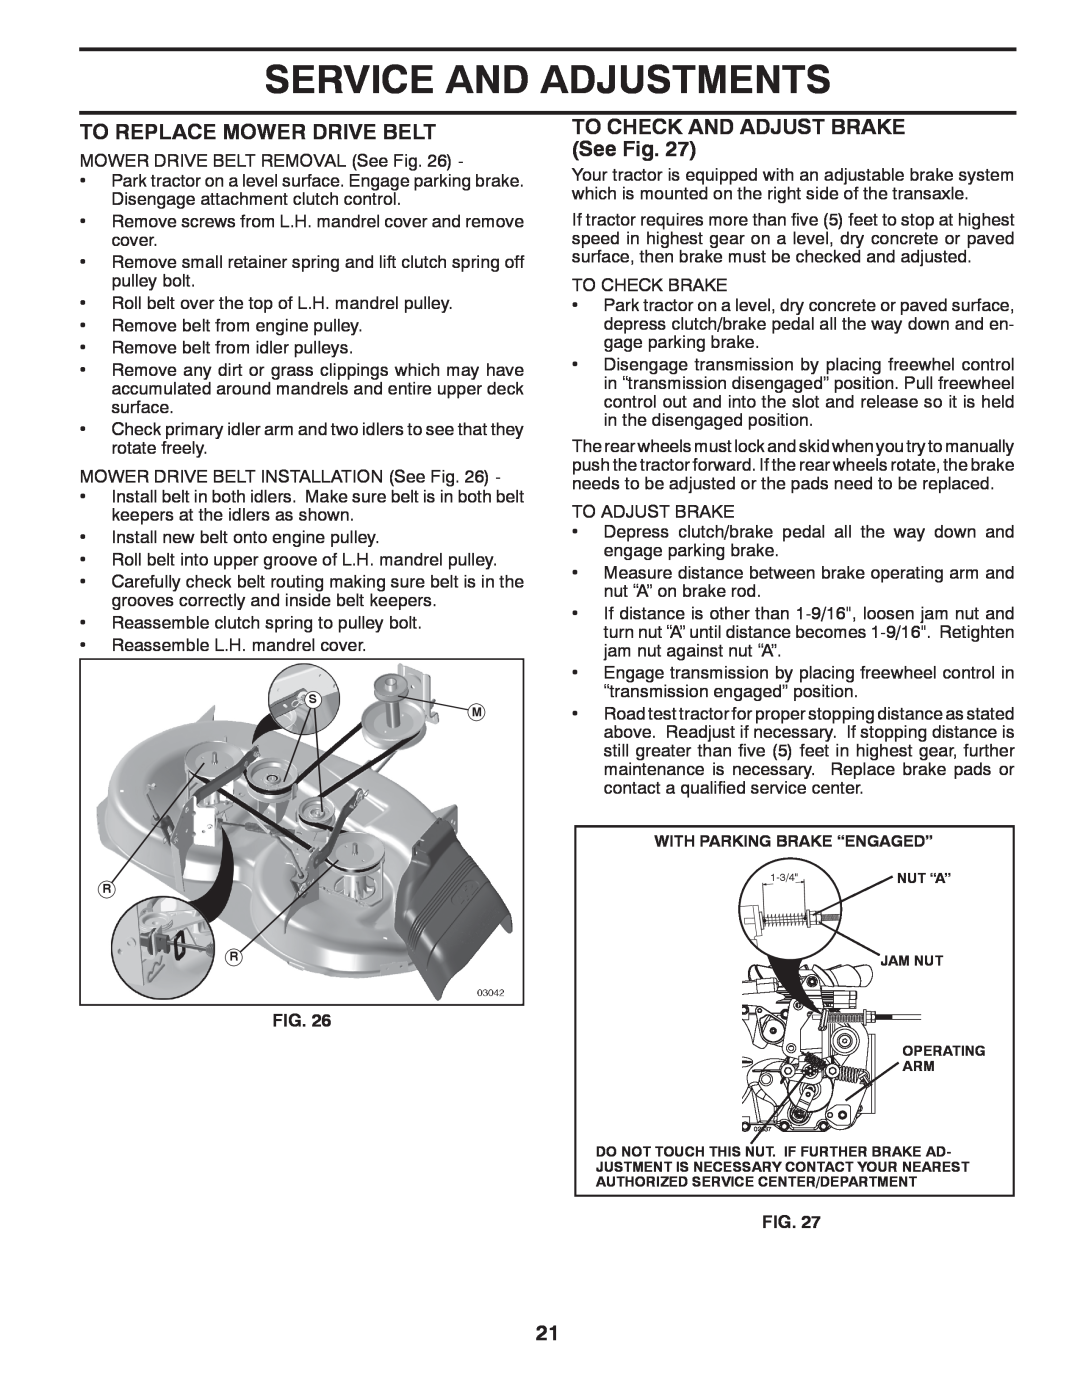 Poulan PB22H46YT manual To Replace Mower Drive Belt, TO CHECK AND ADJUST BRAKE See Fig, Service And Adjustments 